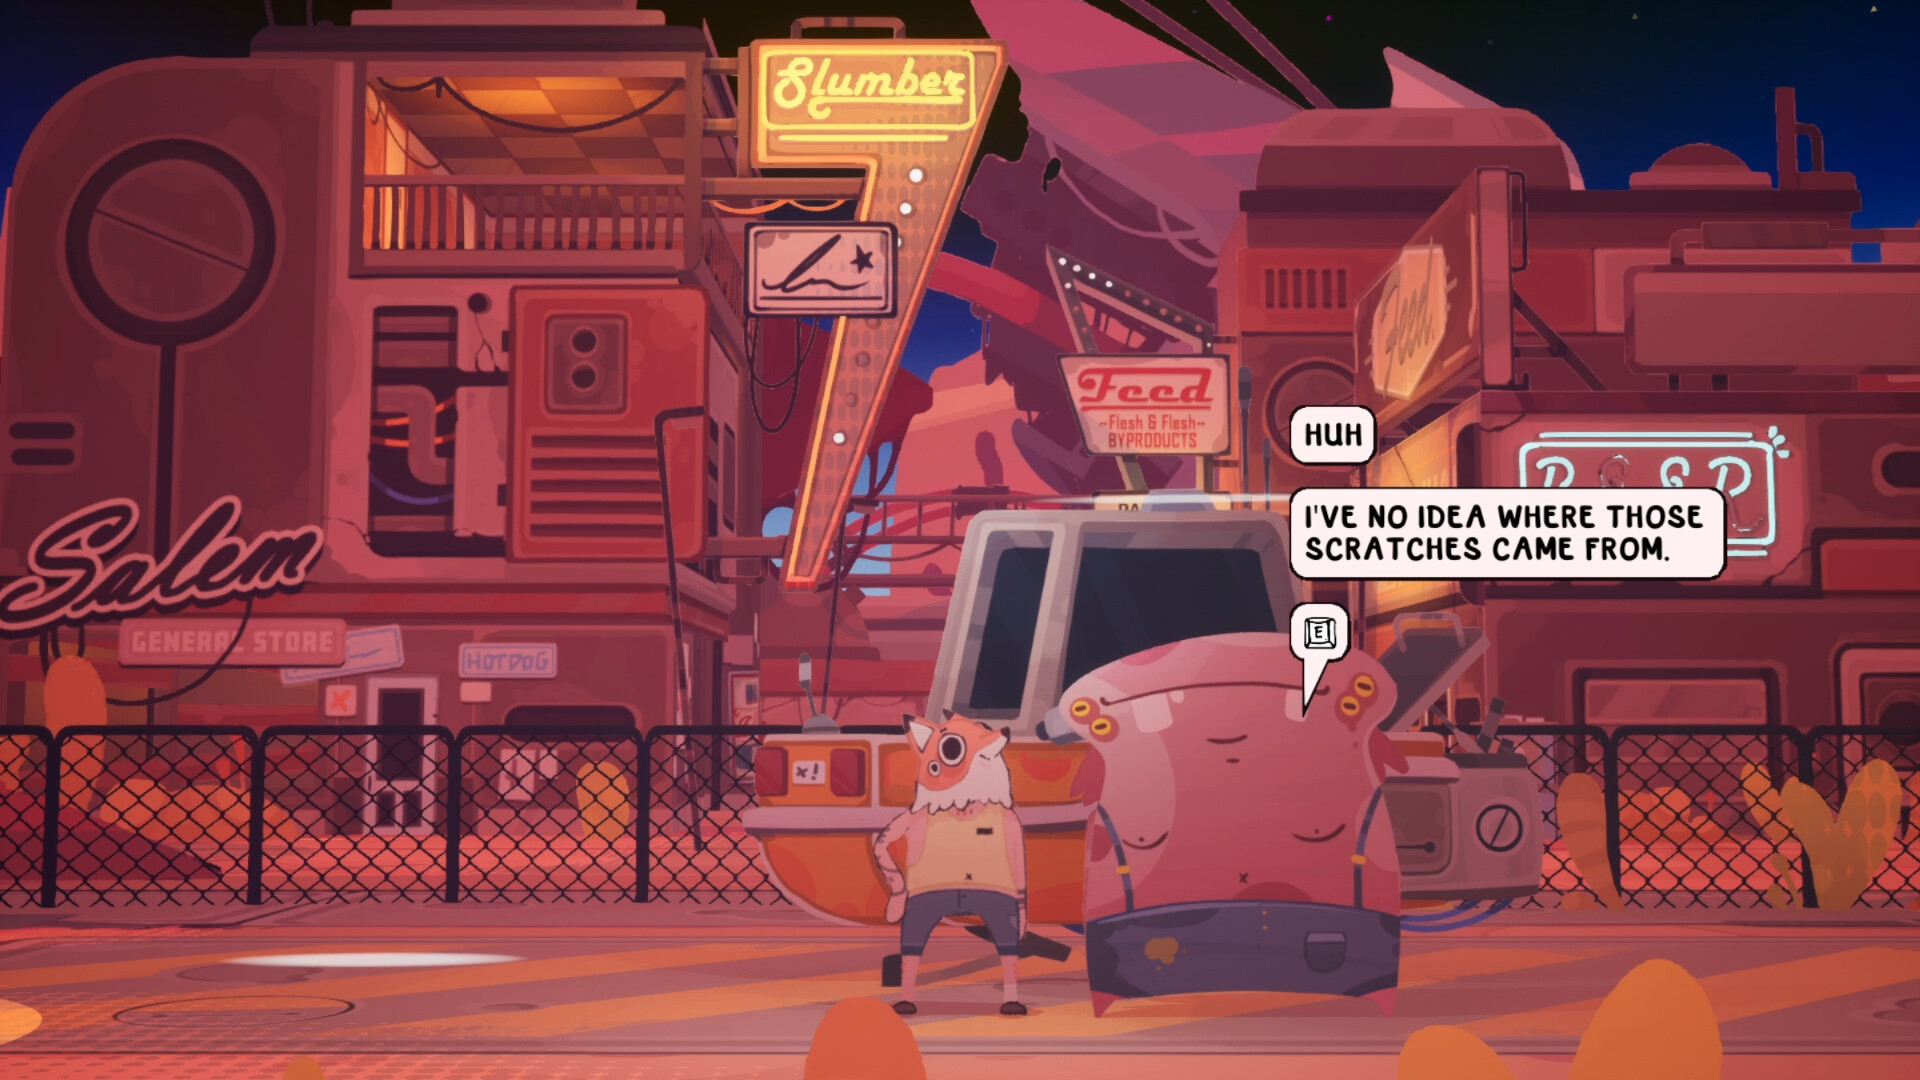 The fox-headed mechanic speaks to a large pink alien with speech bubbles above his head, one which says 